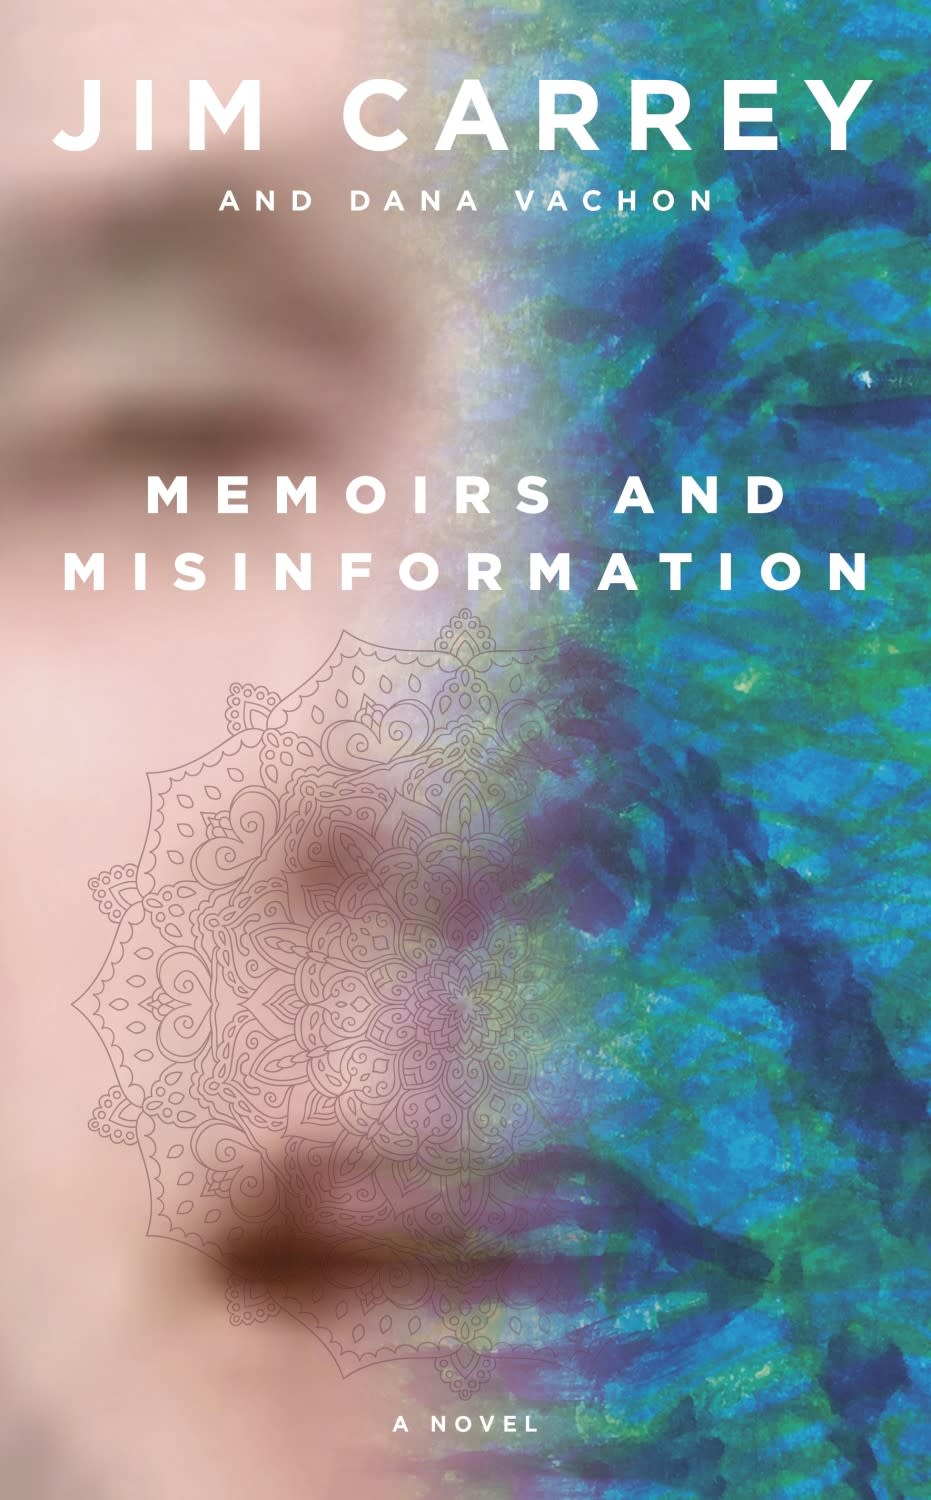 Book jacket for "Memoirs and Misinformation" by Jim Carrey and Dana Vachon.